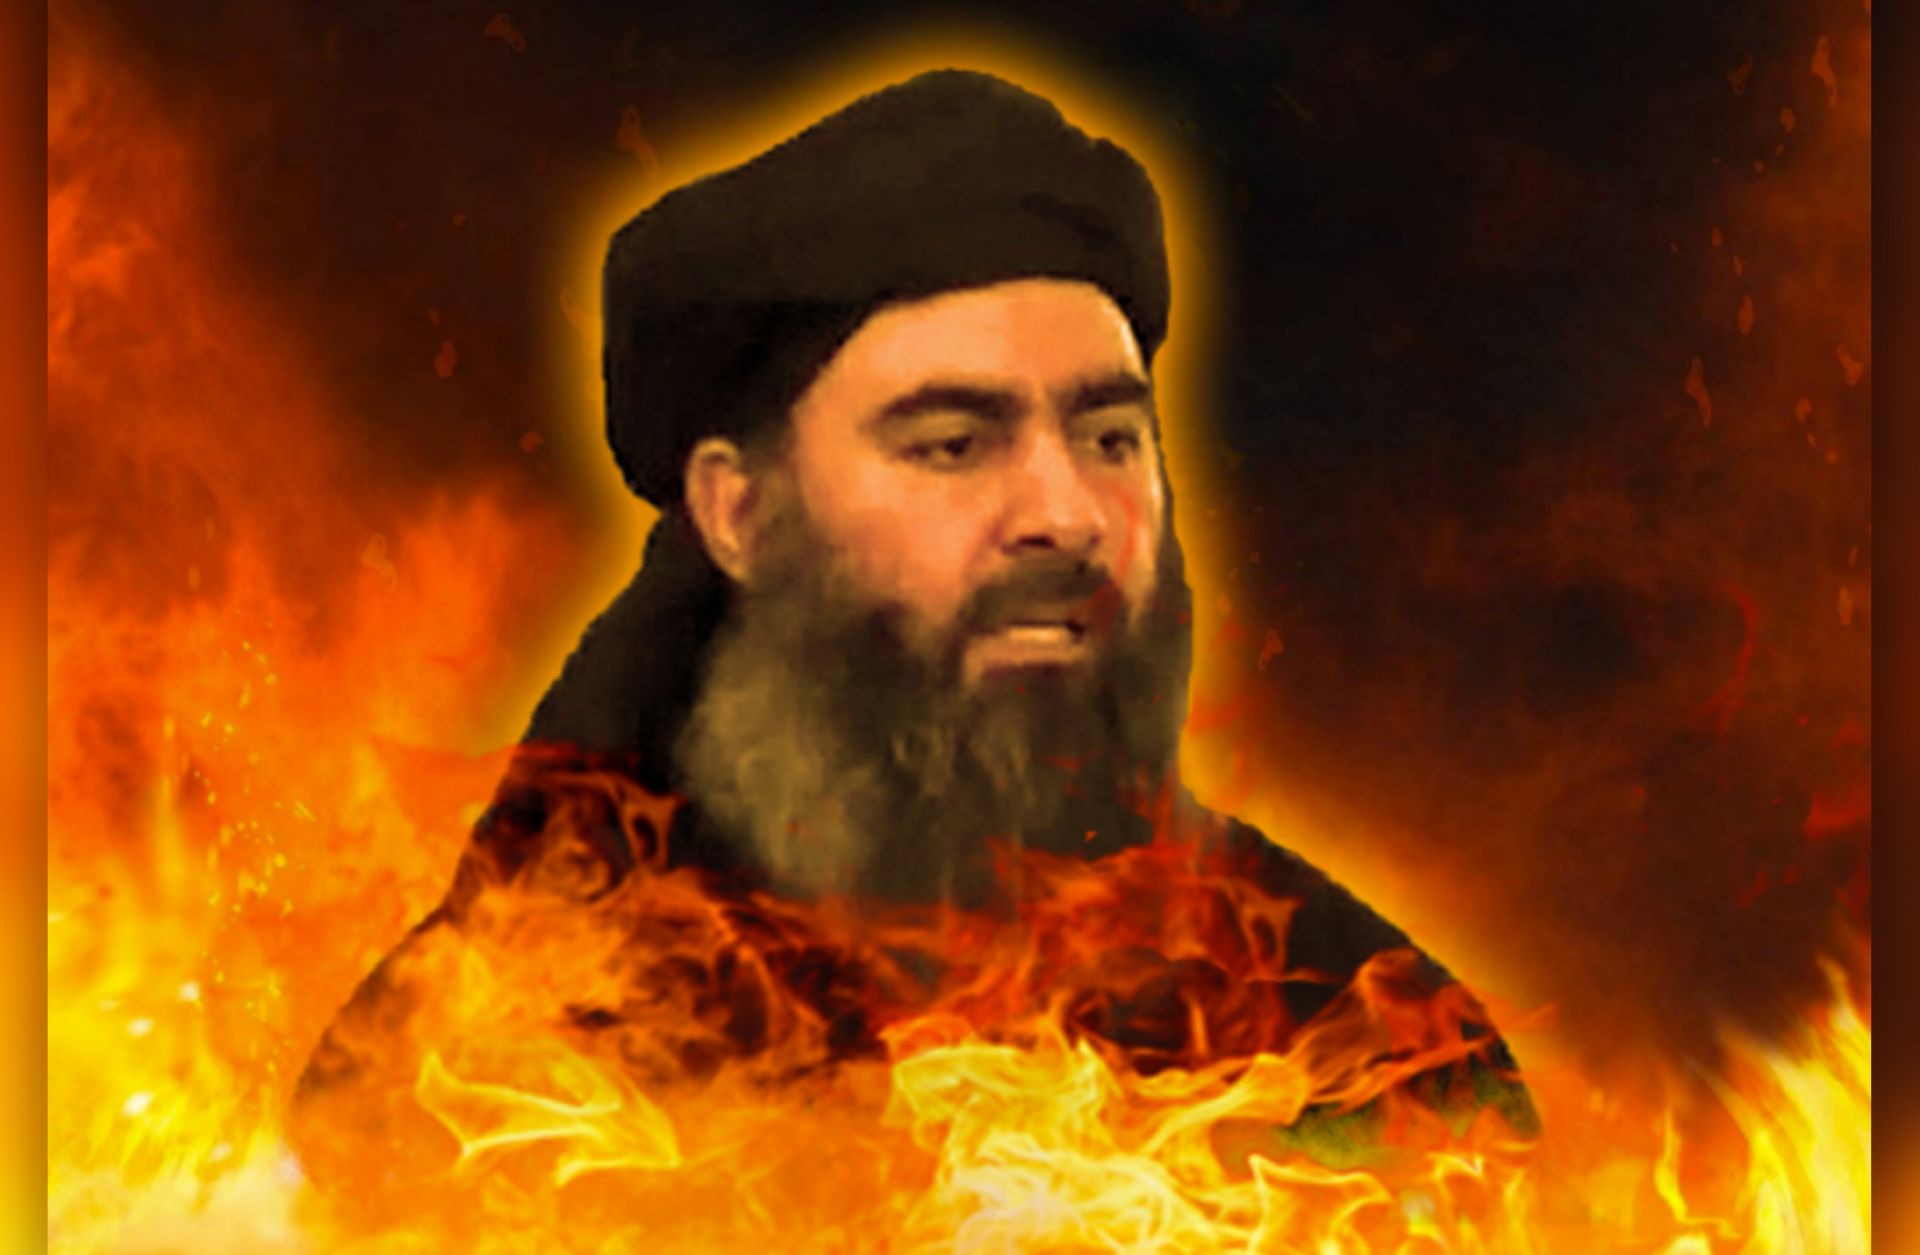 An image from an al Qaeda-inspired magazine shows Islamic State leader Abu Bakr al-Baghdadi in hell. Three years after the Islamic State defected from al Qaeda in an acrimonious and highly public split, many are still concerned that the two could someday reunite.